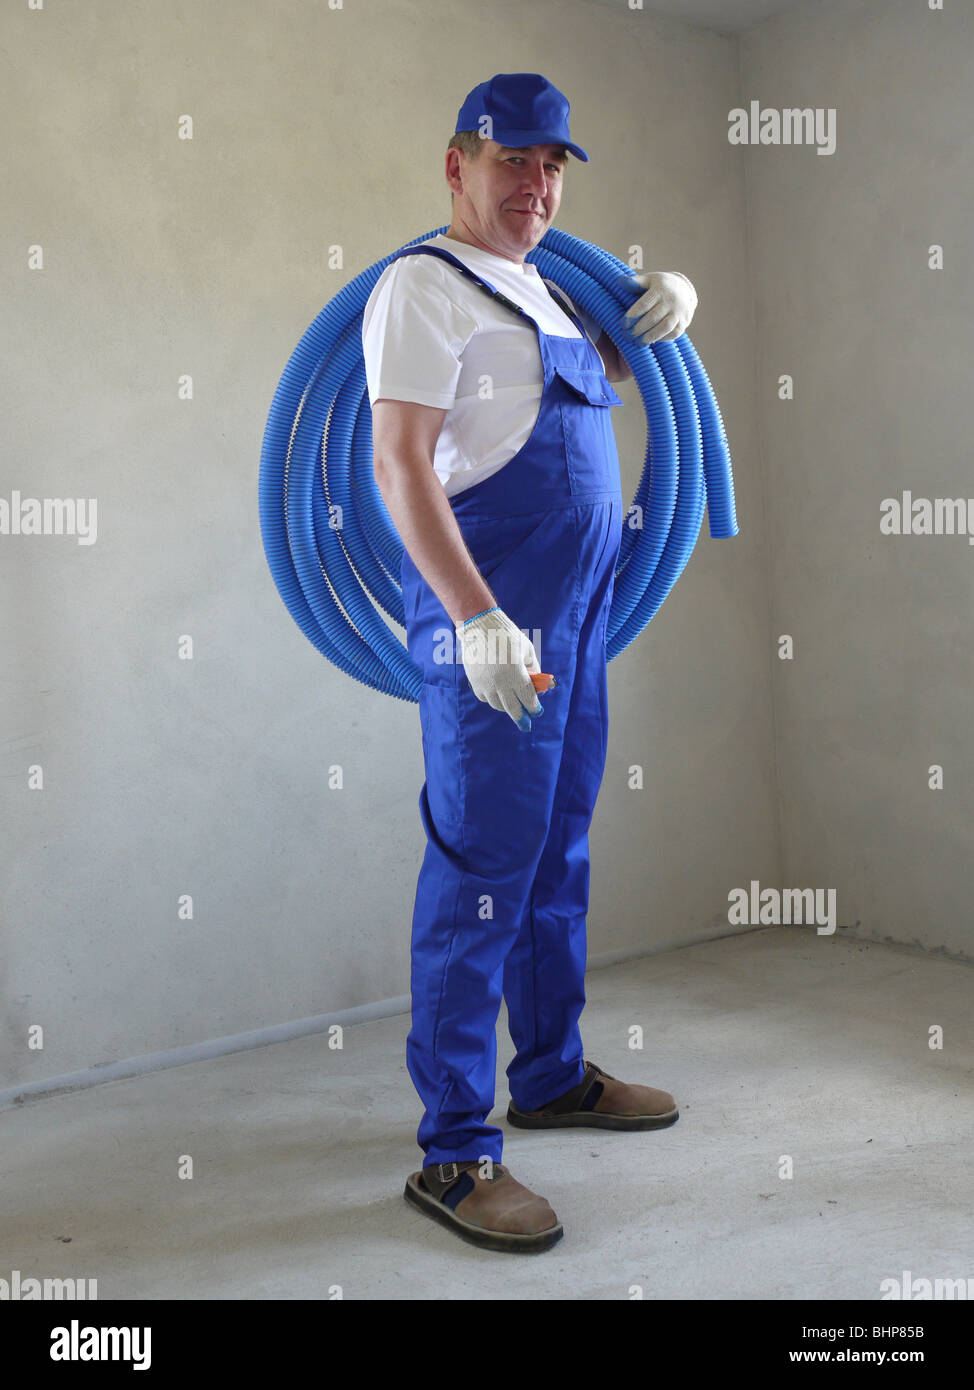 Electrician wearing white shirt, blue cap and blue uniform posing with coil of PVC flexible corrugated cable protection pipe Stock Photo